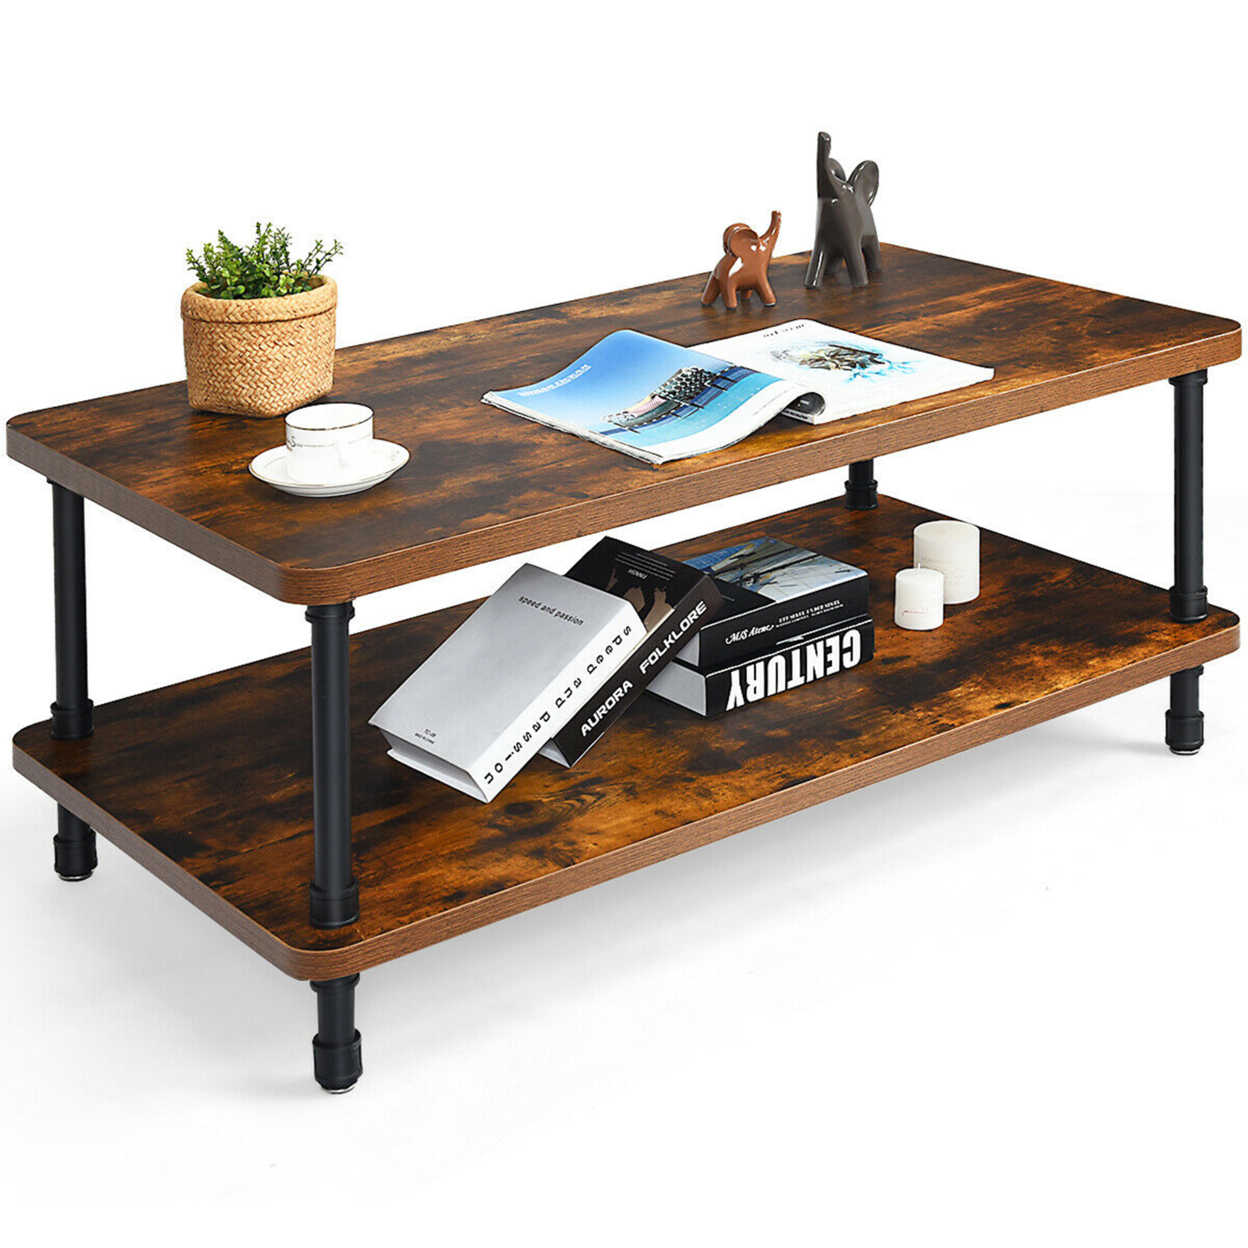 Industrial Coffee Table Rustic Accent Table Storage Shelf Living Room Furniture